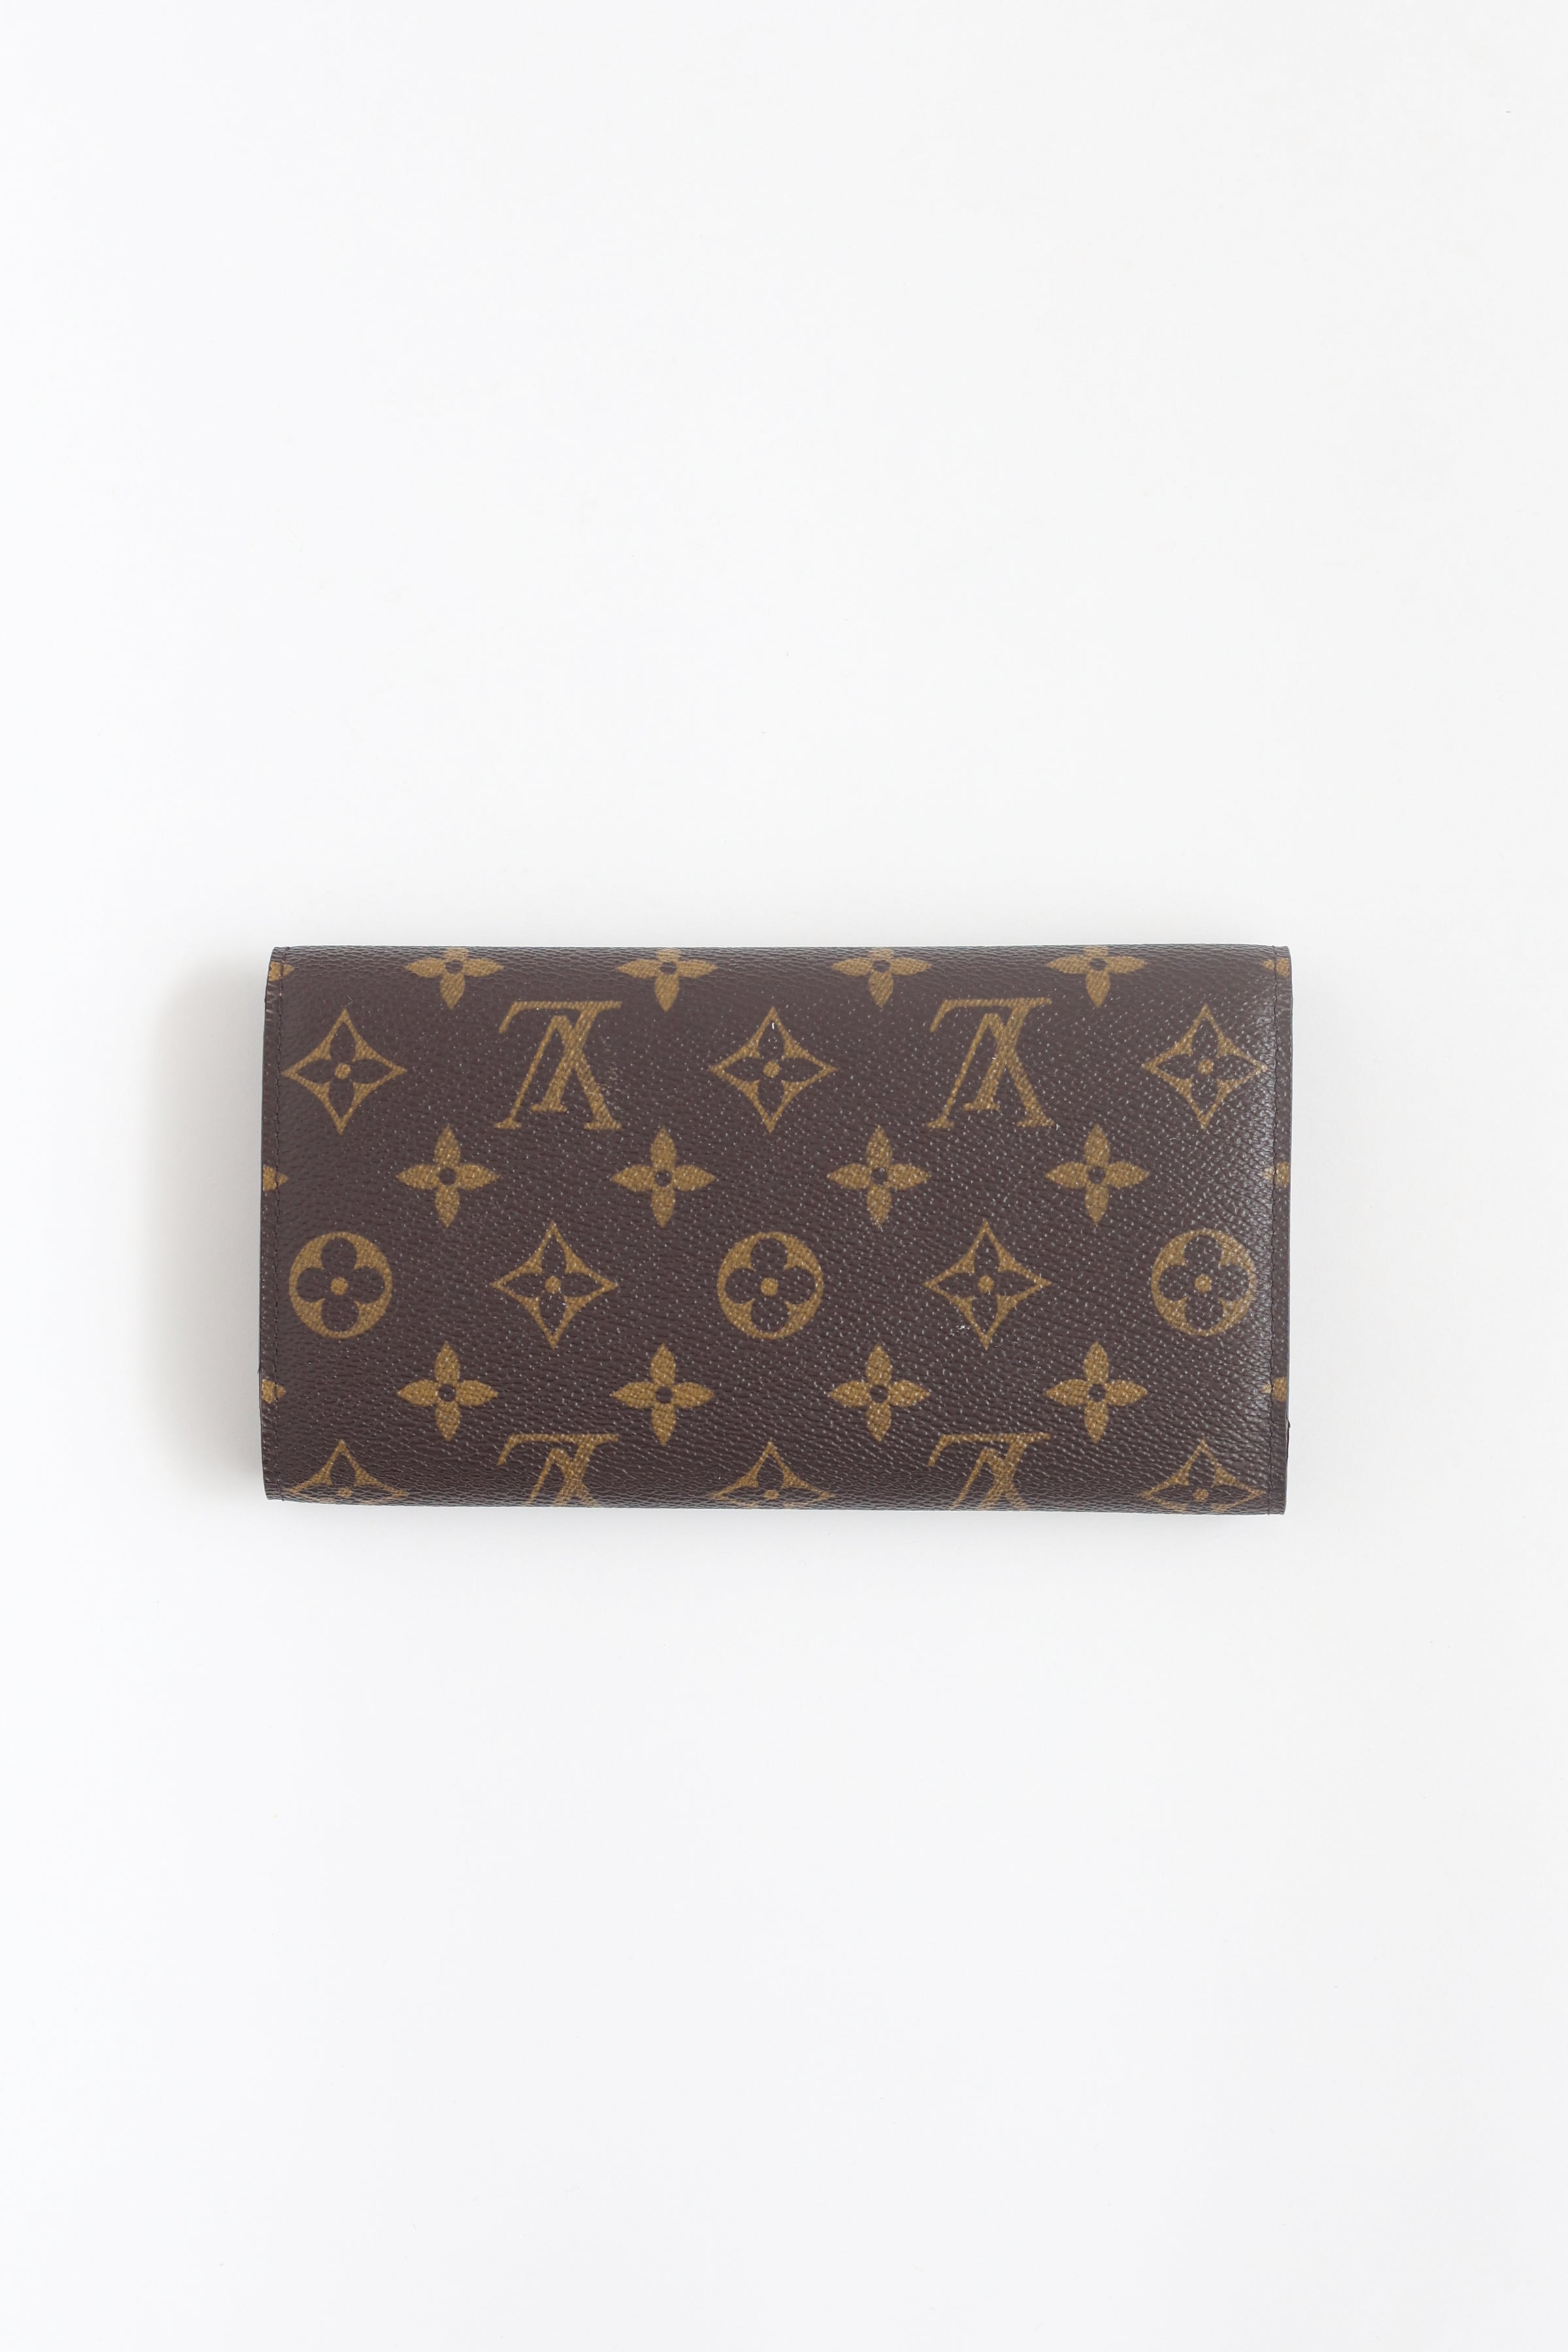 KOMEHYO, 【Unused items】LOUIS VUITTON Millésime Leather Portefeuil Brother  M81756 Wallet, LOUIS VUITTON, Brand wallets and  accessories, Wallets, Others